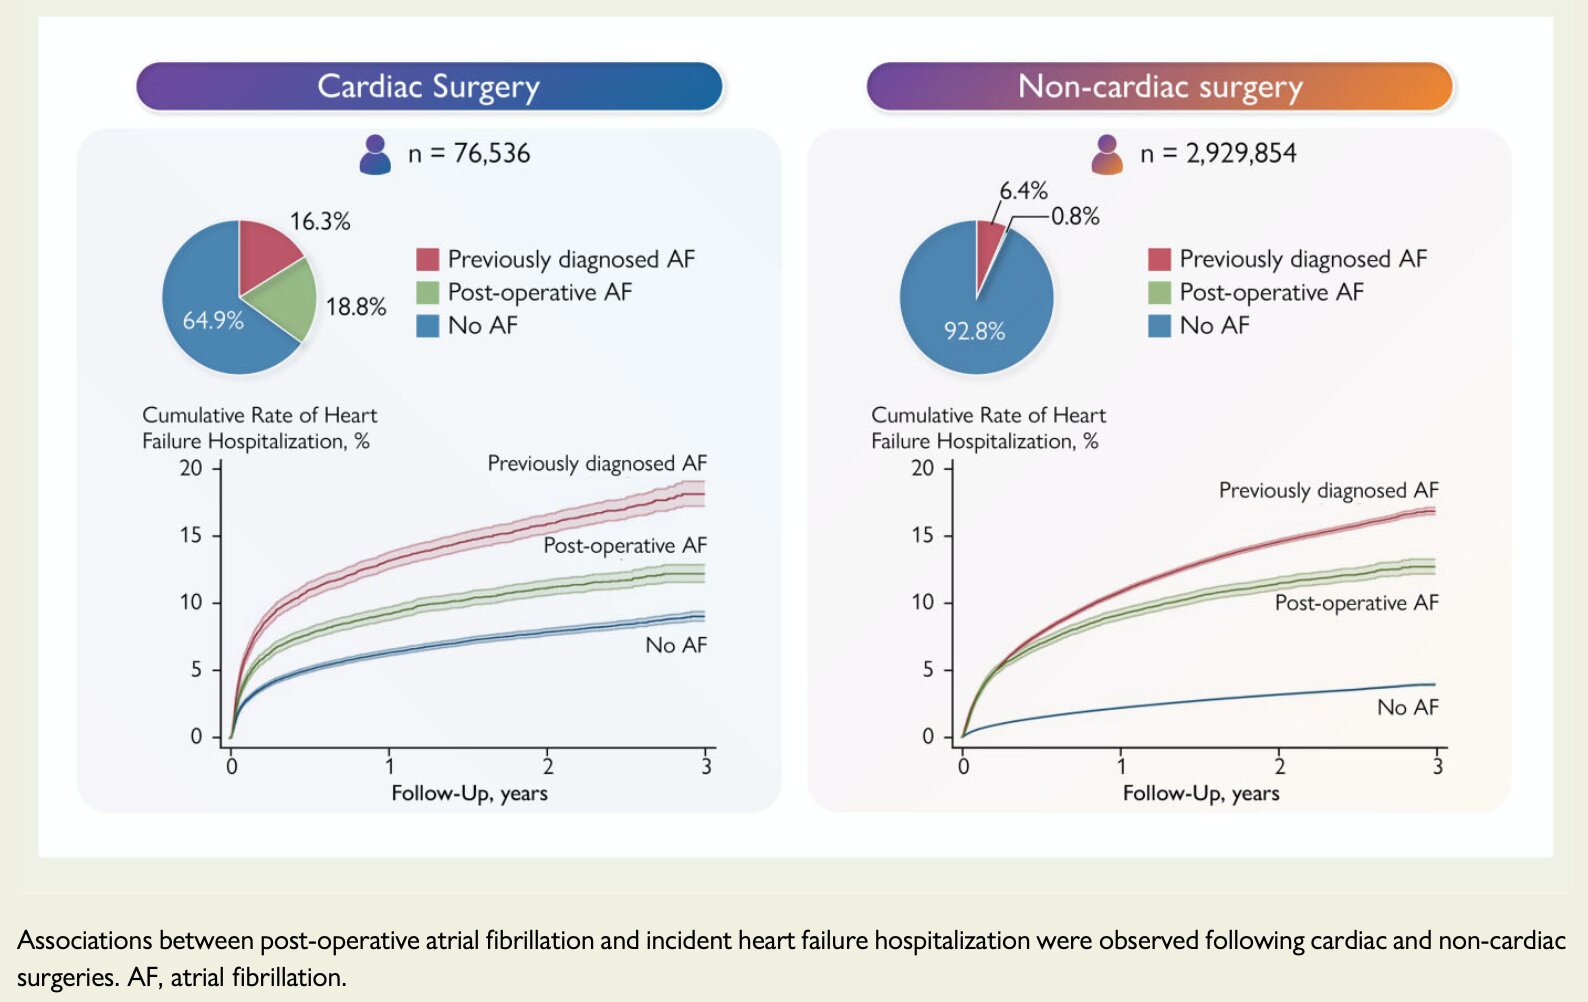 #Atrial fibrillation after surgery is linked to an increased risk of hospitalization for heart failure